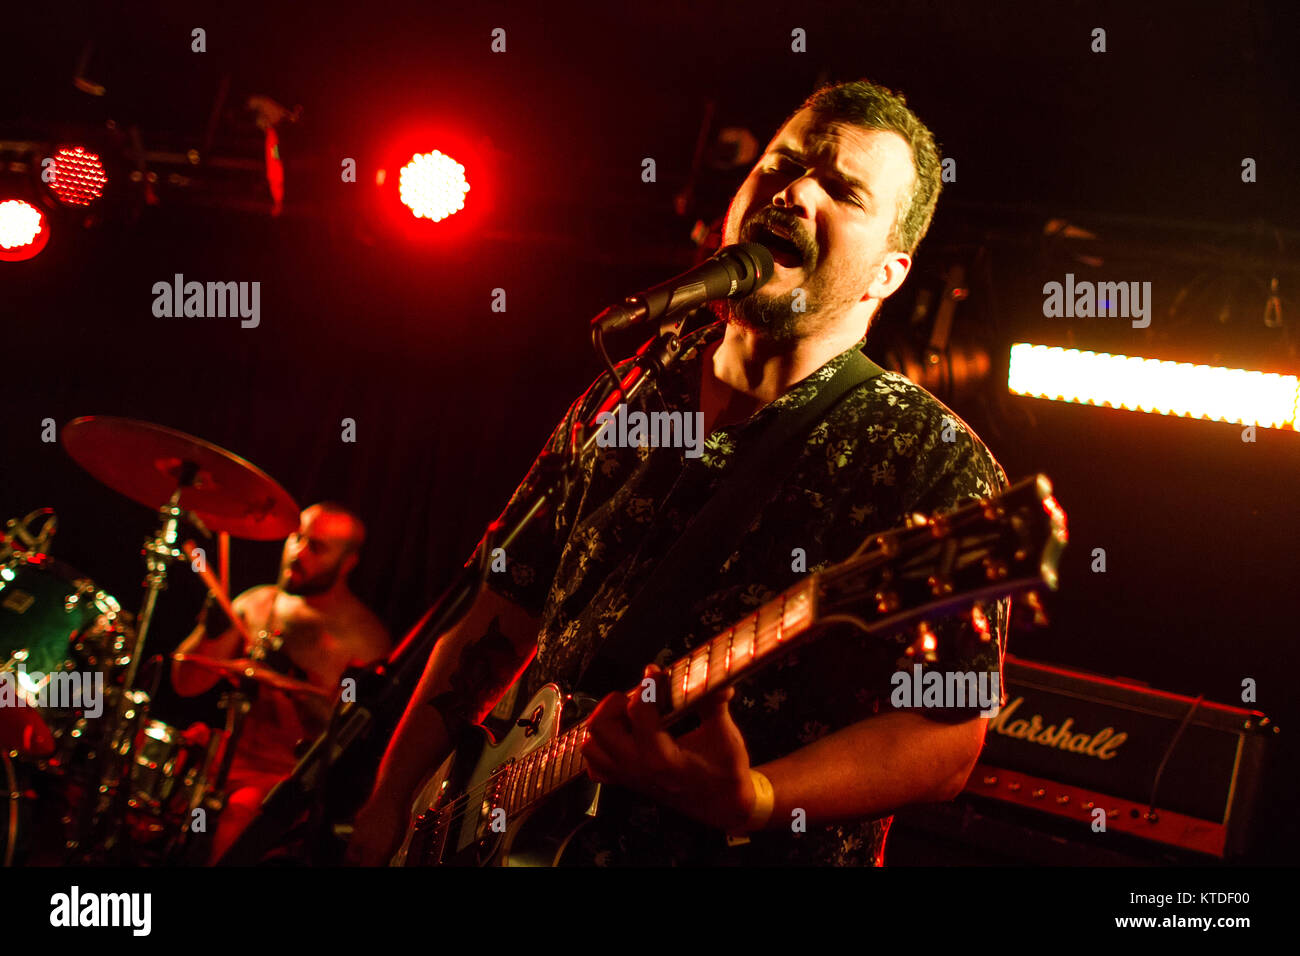 The American stoner and sludge metal band Torche performs a live concert at BETA in Copenhagen. Here vocalist and guitarist Steve Brooks is seen live on stage. Denmark, 08/11 2015. Stock Photo